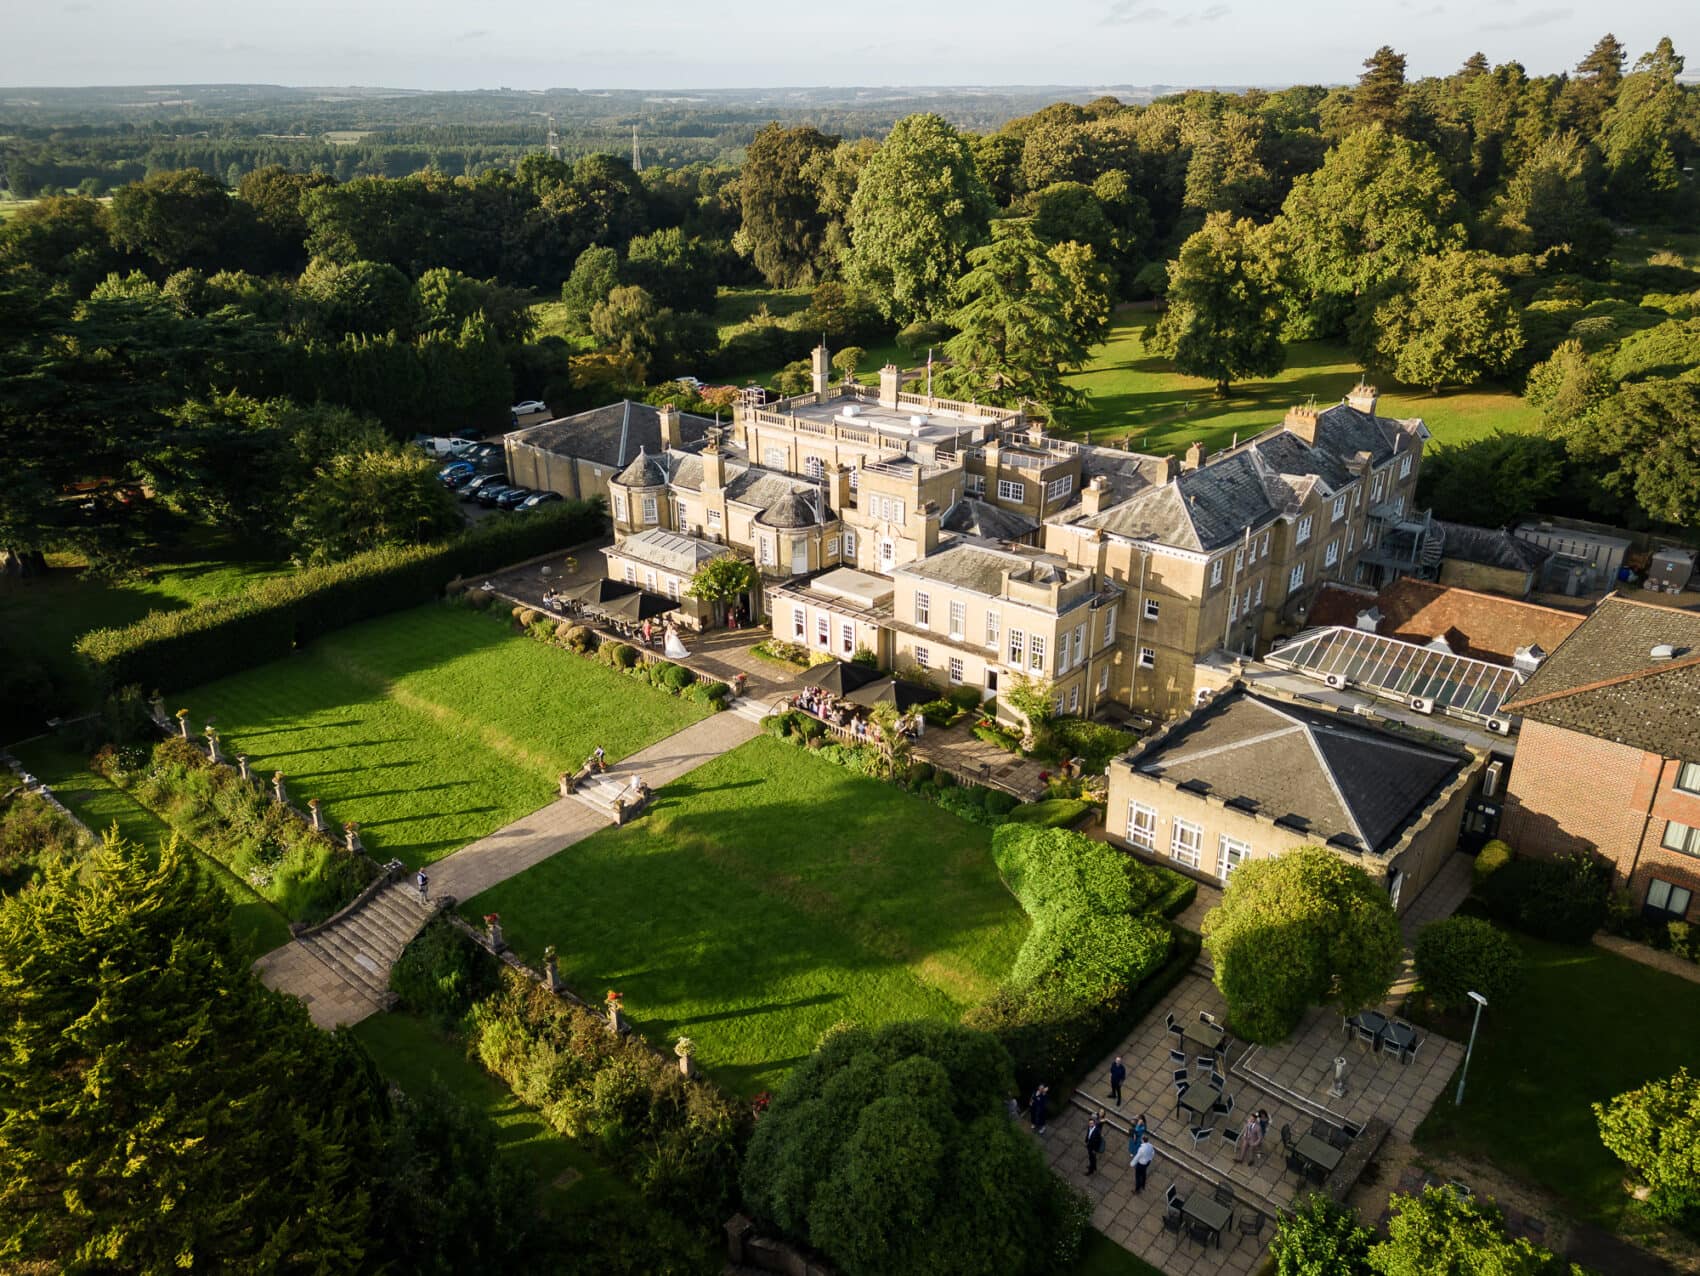 Chilworth Manor Hotel from the air in evening light